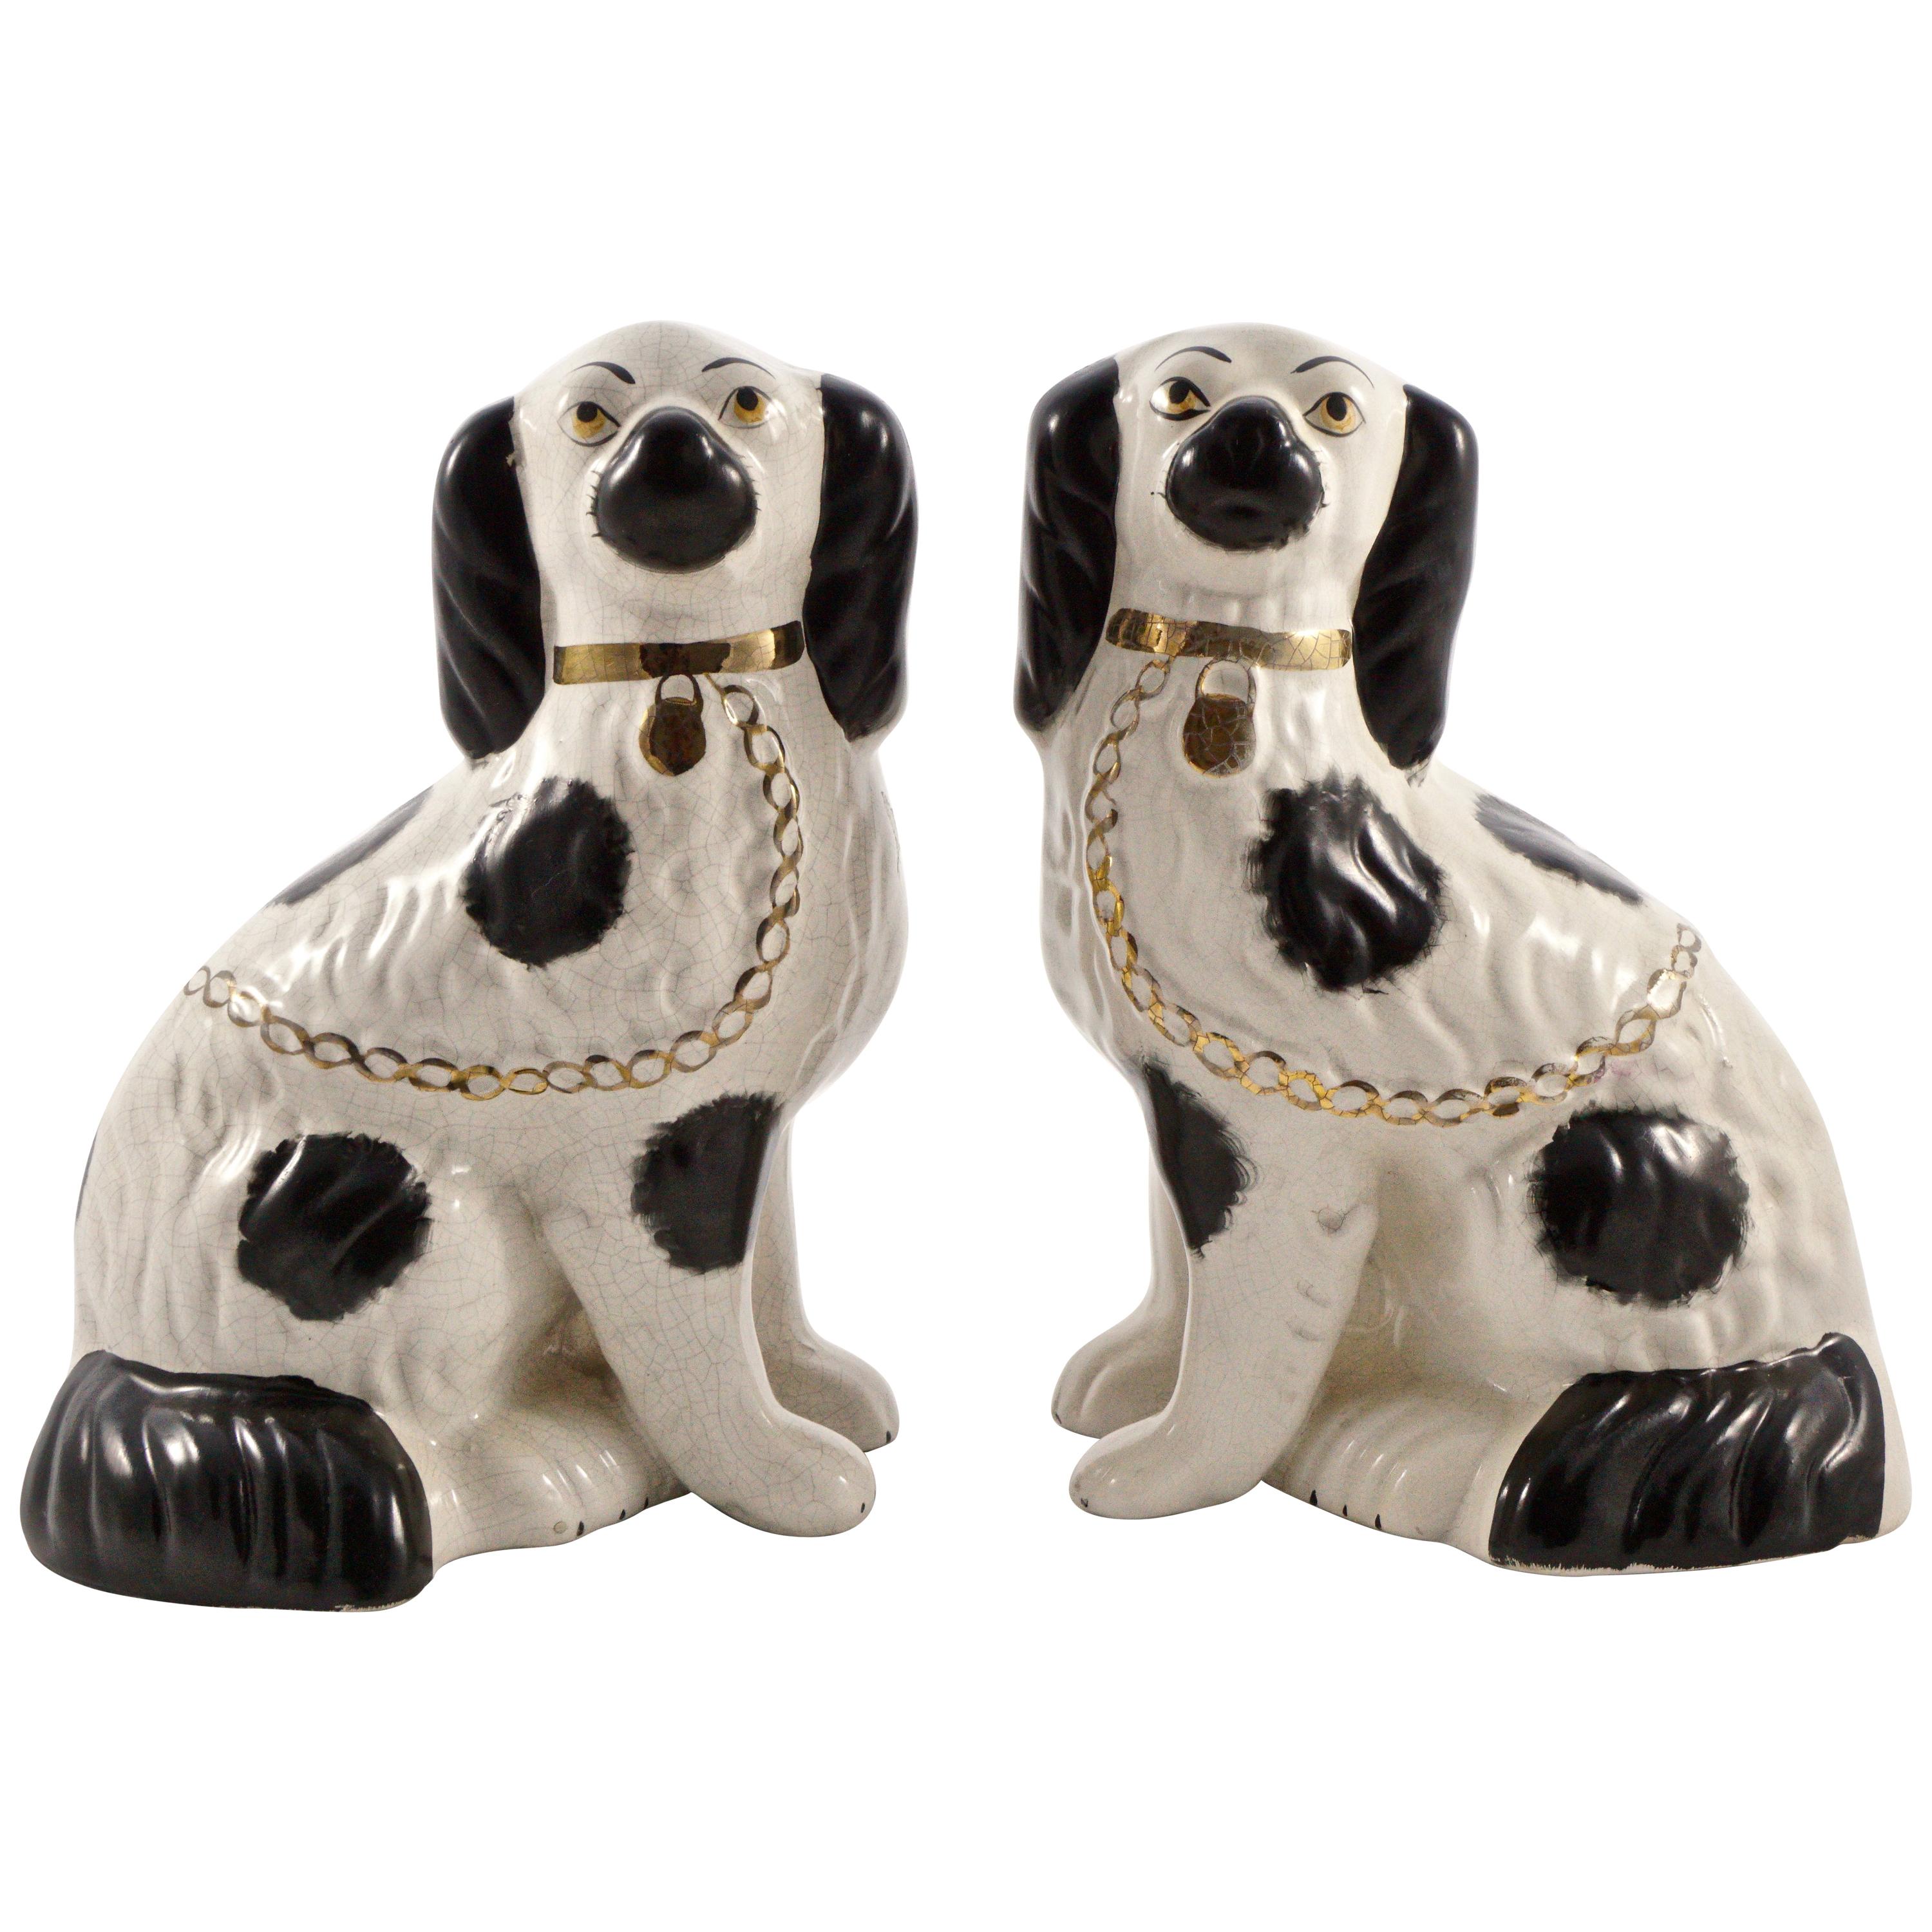 Pair of Staffordshire Hand Painted Black and White Pottery Dog Figurines